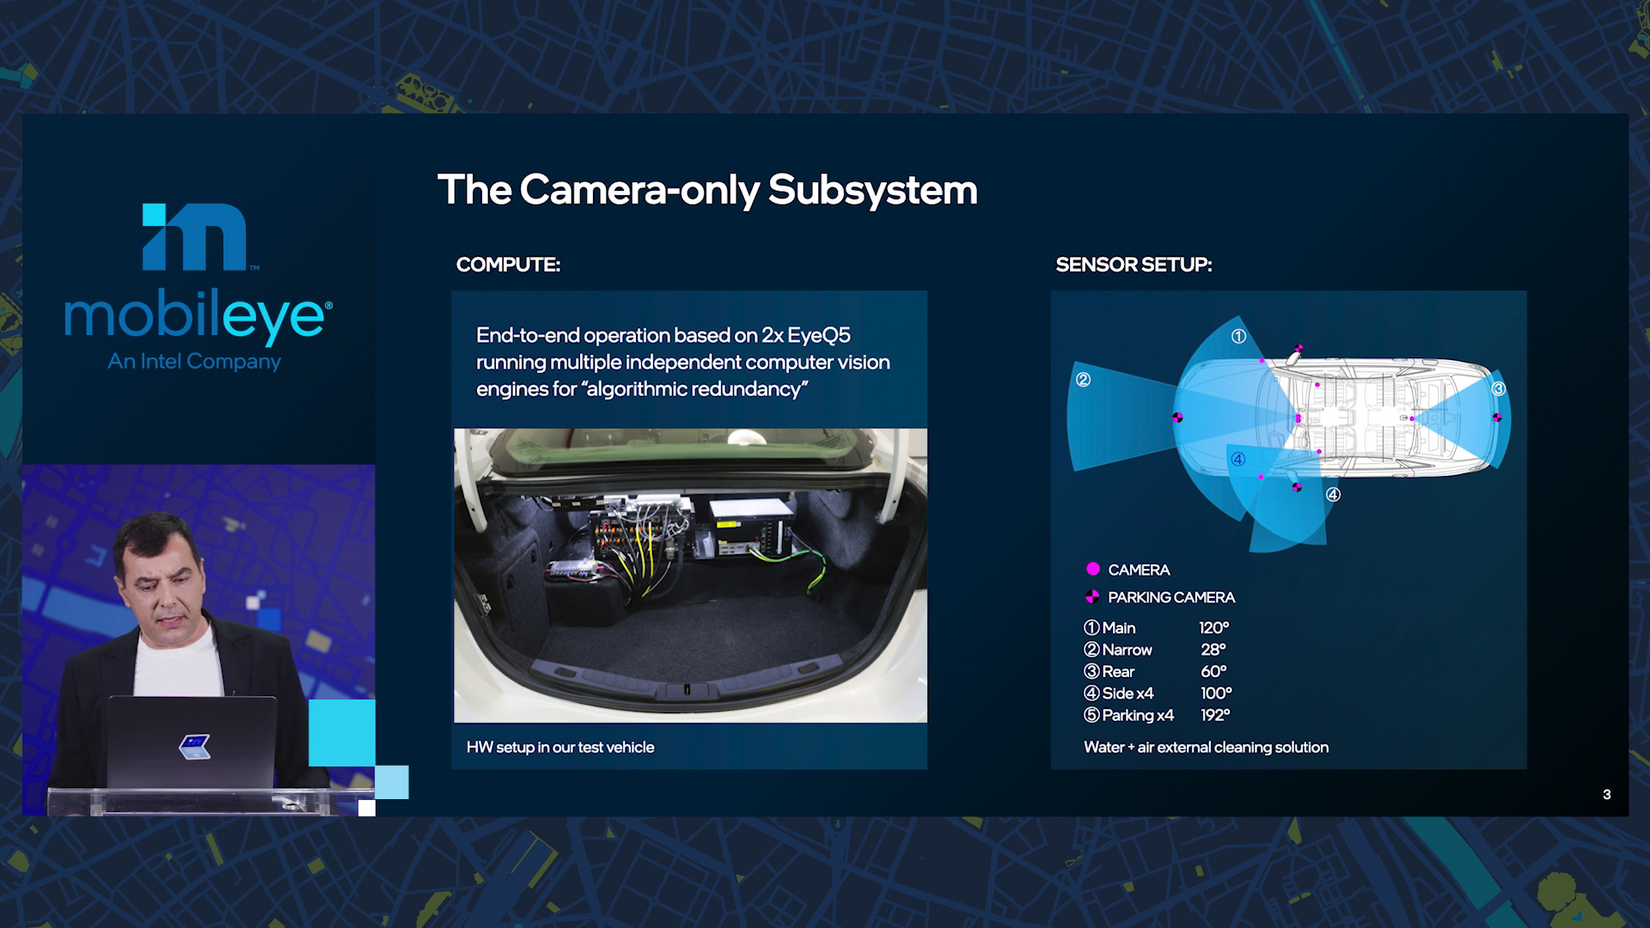 The camera-only subsystem